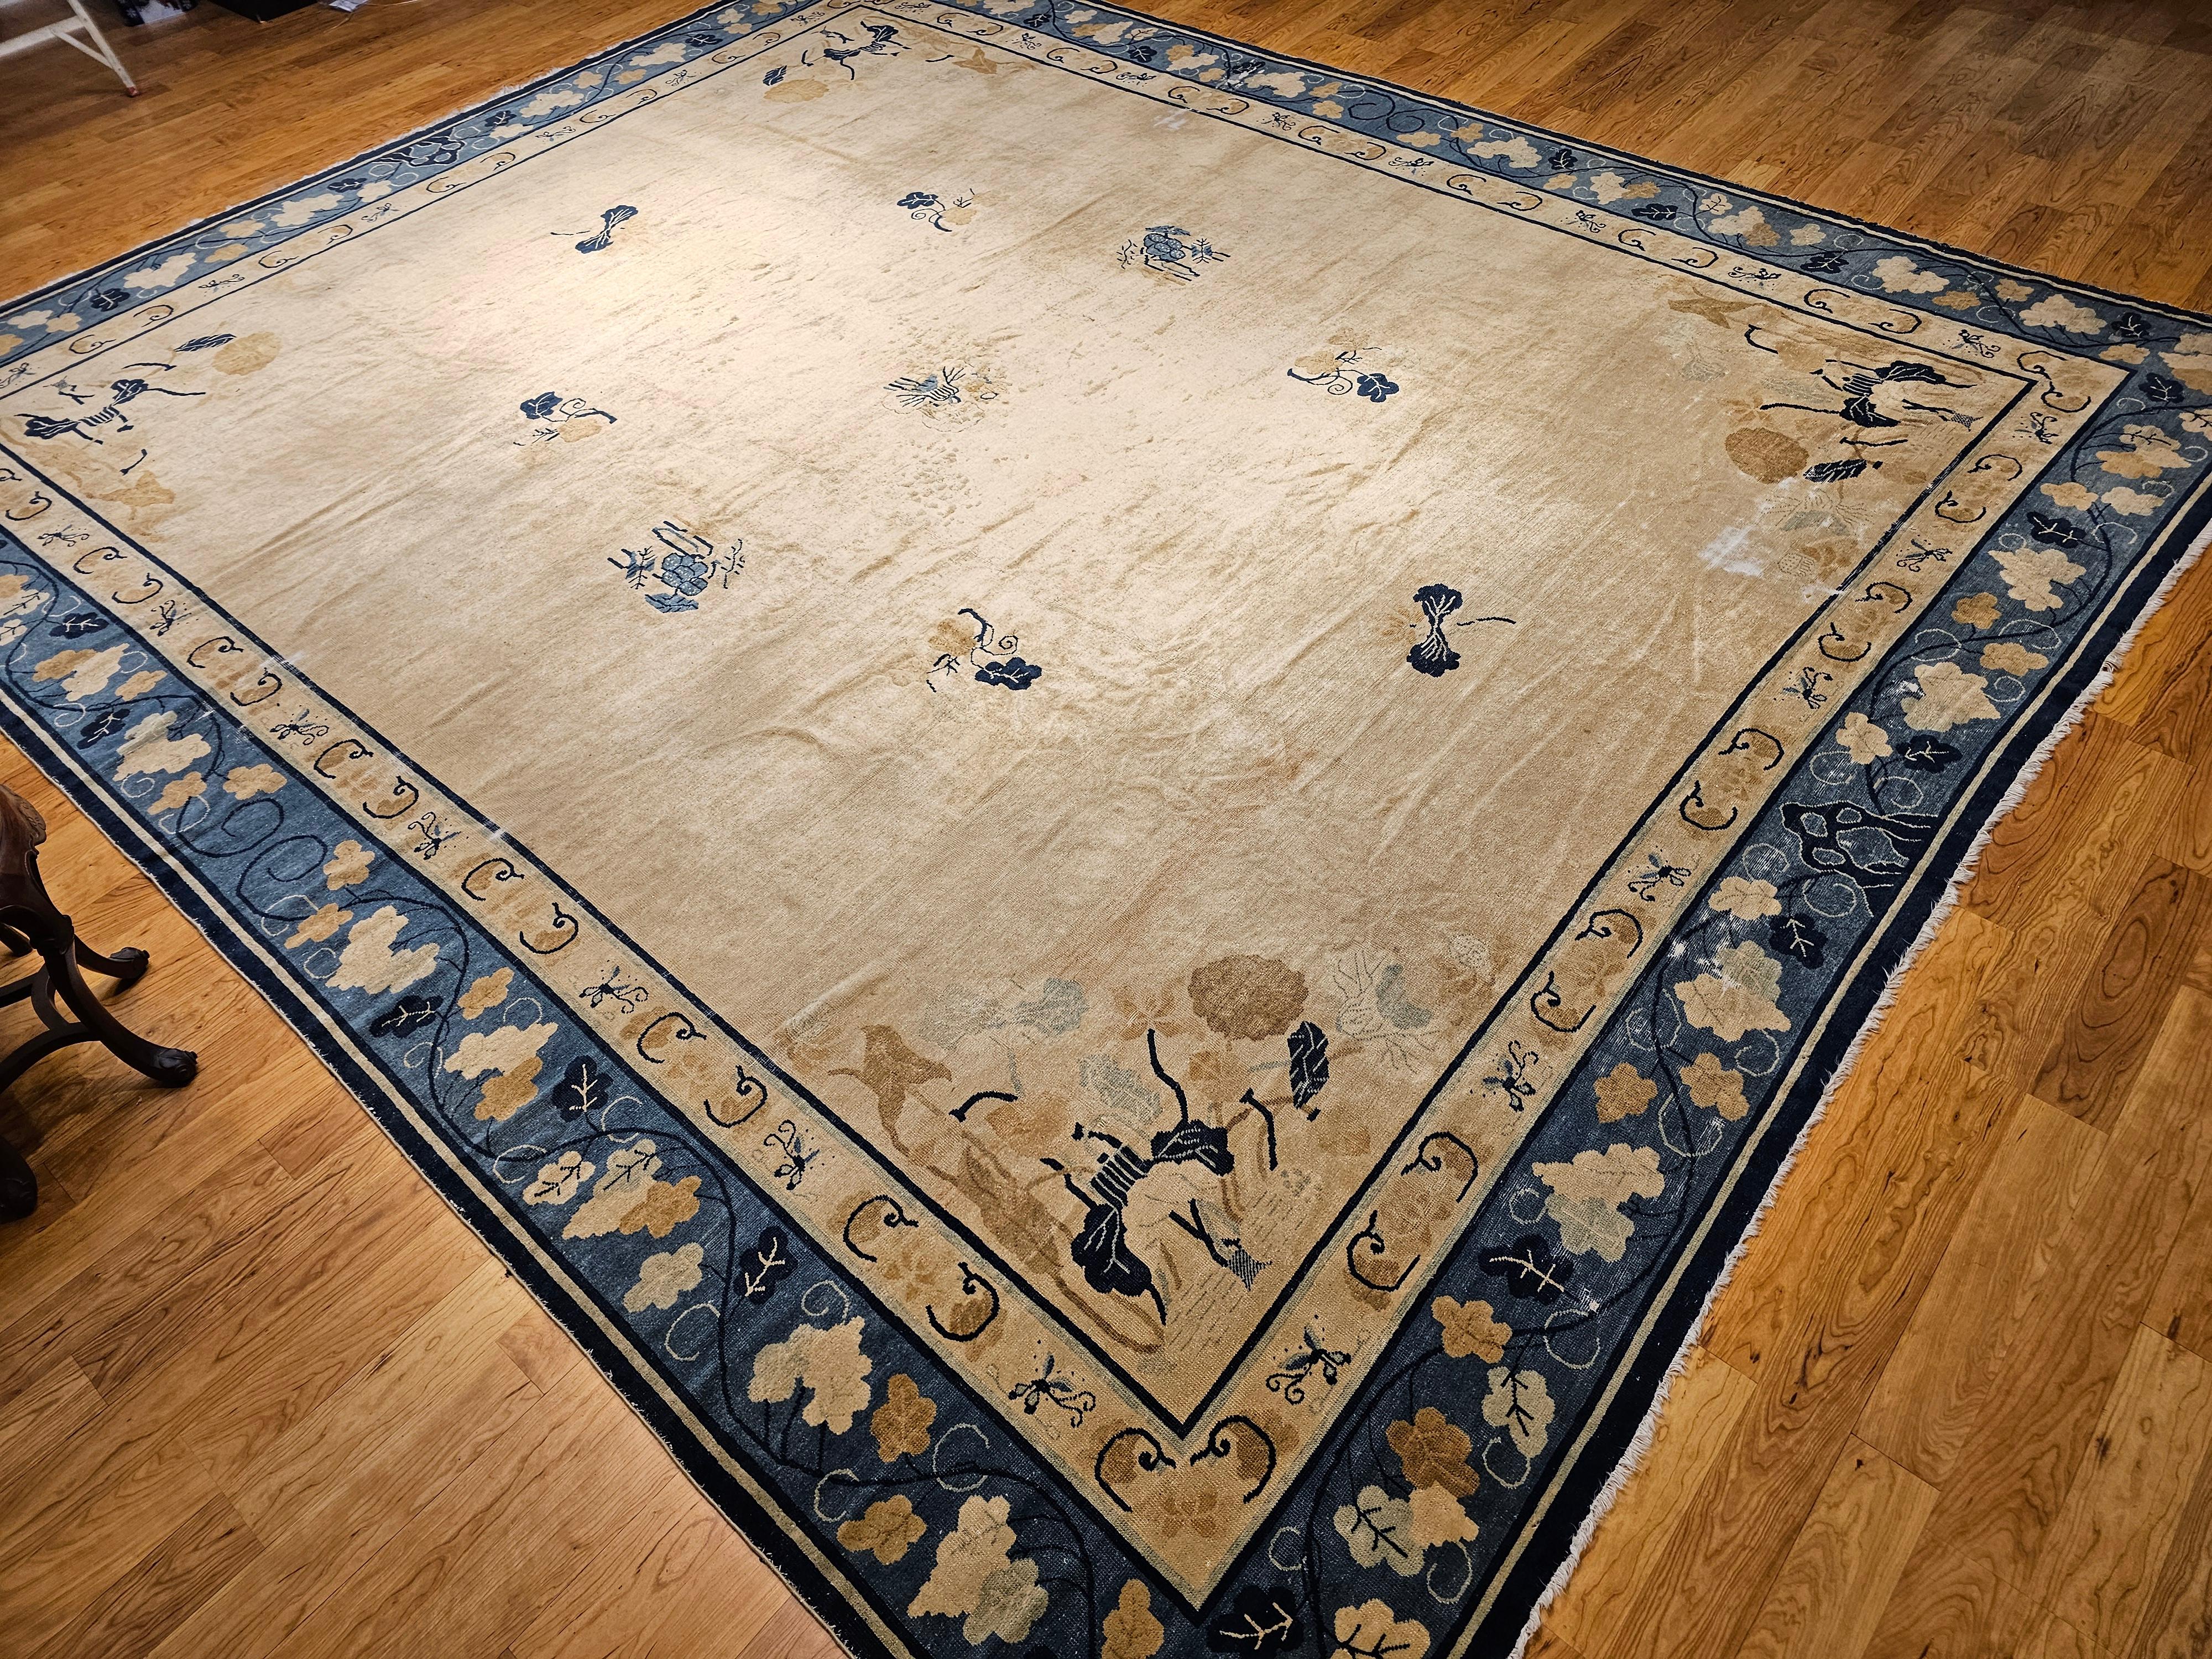 19th Century Oversized Chinese Peking Rug in Wheat, Navy, Brown, Green, Sky-Blue For Sale 8